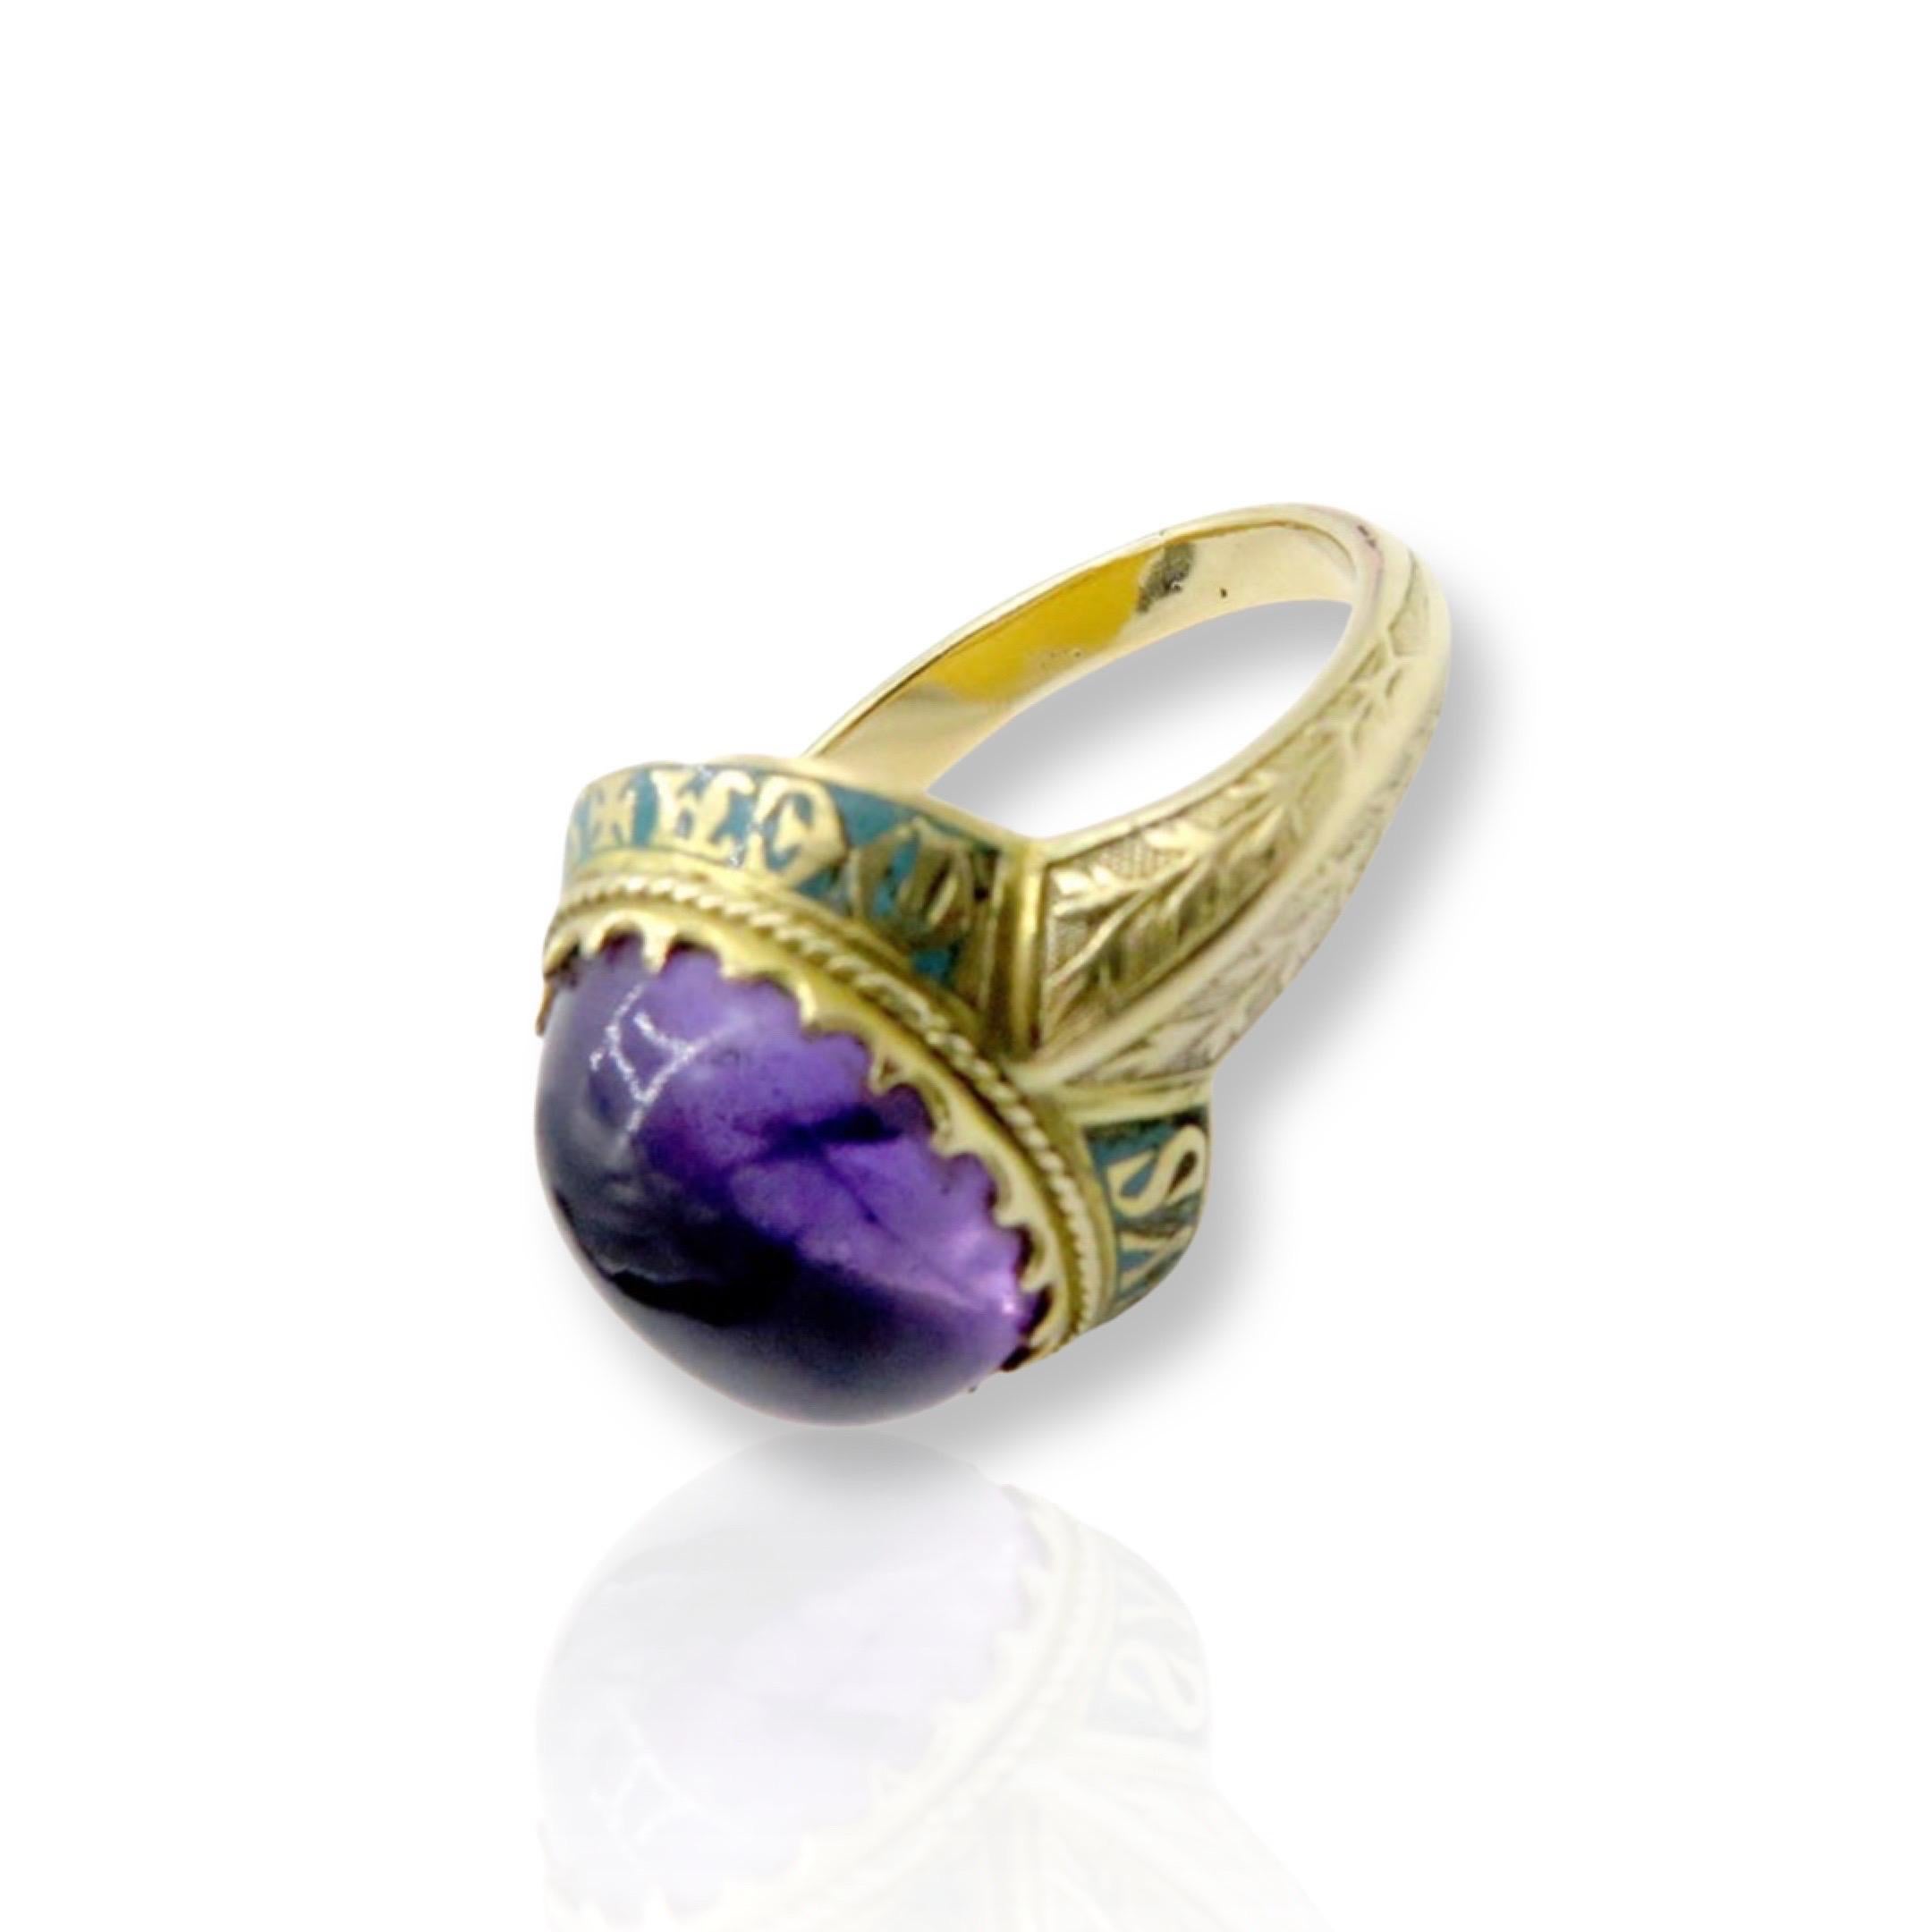 A, beautiful bishops ring with a stunning cabochon amethyst. This beautiful bishops ring is part of a private collection 